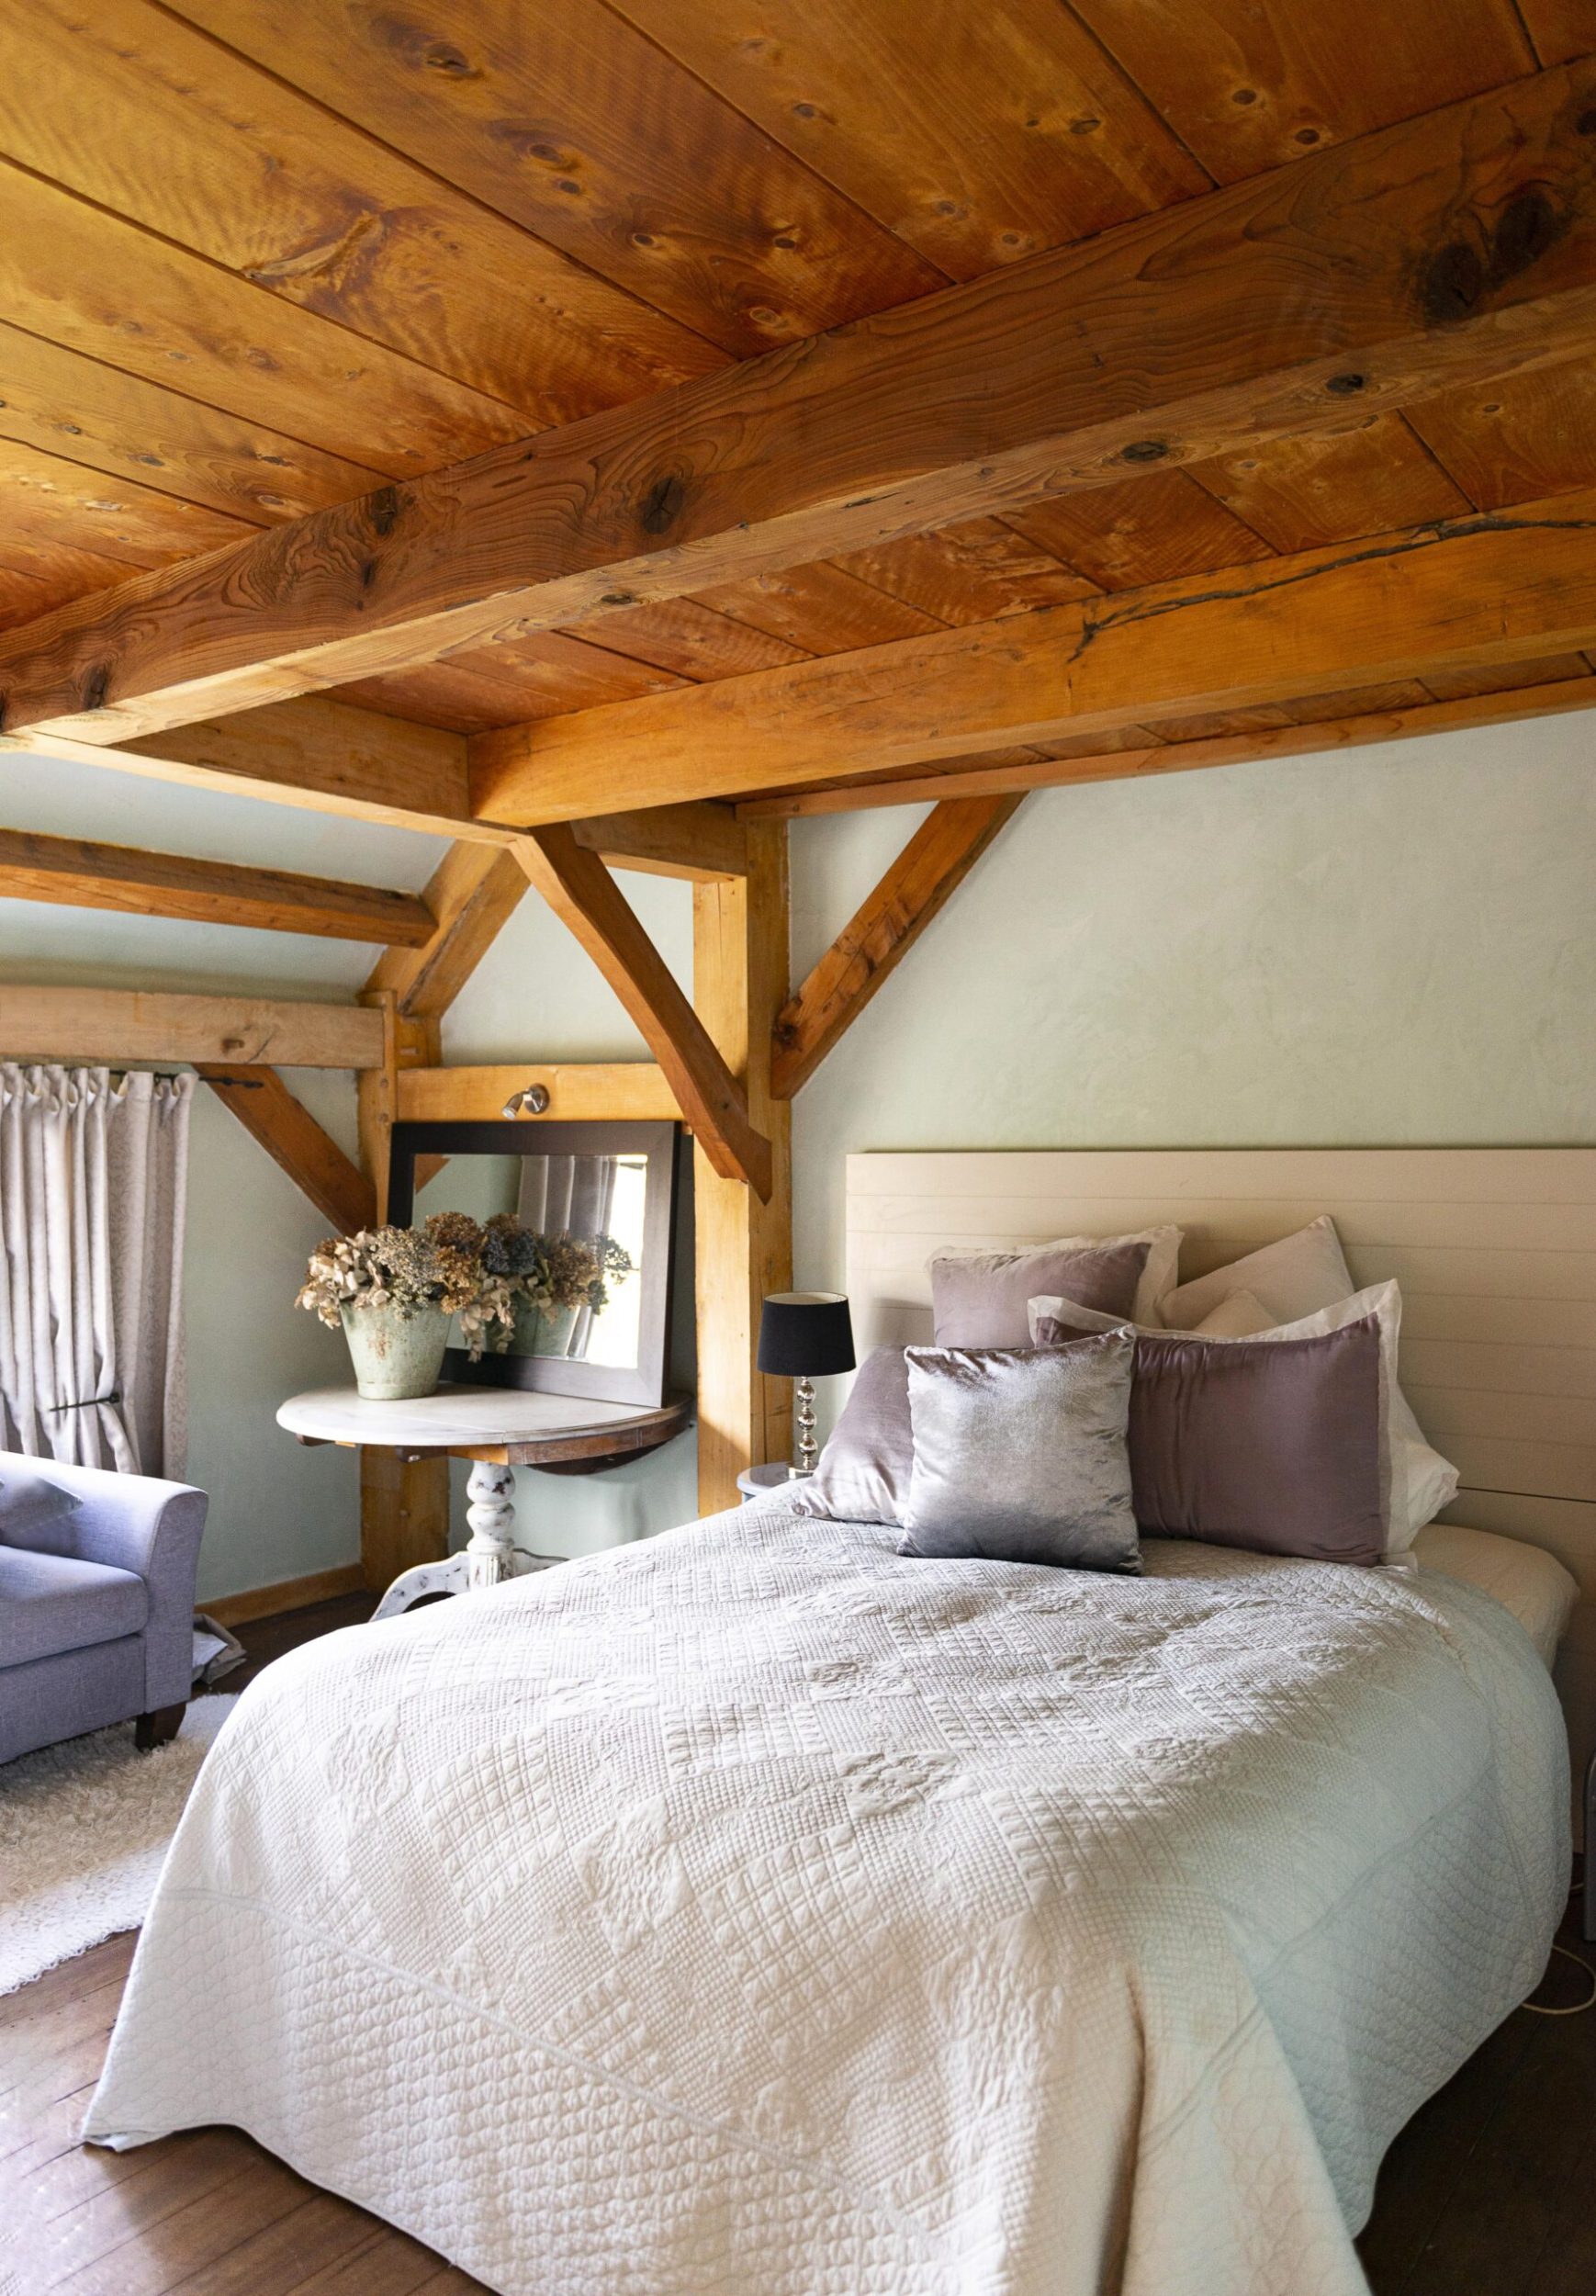 A bedroom in a cottage home with wood beams, a bed with a white duvet and limewashed green walls